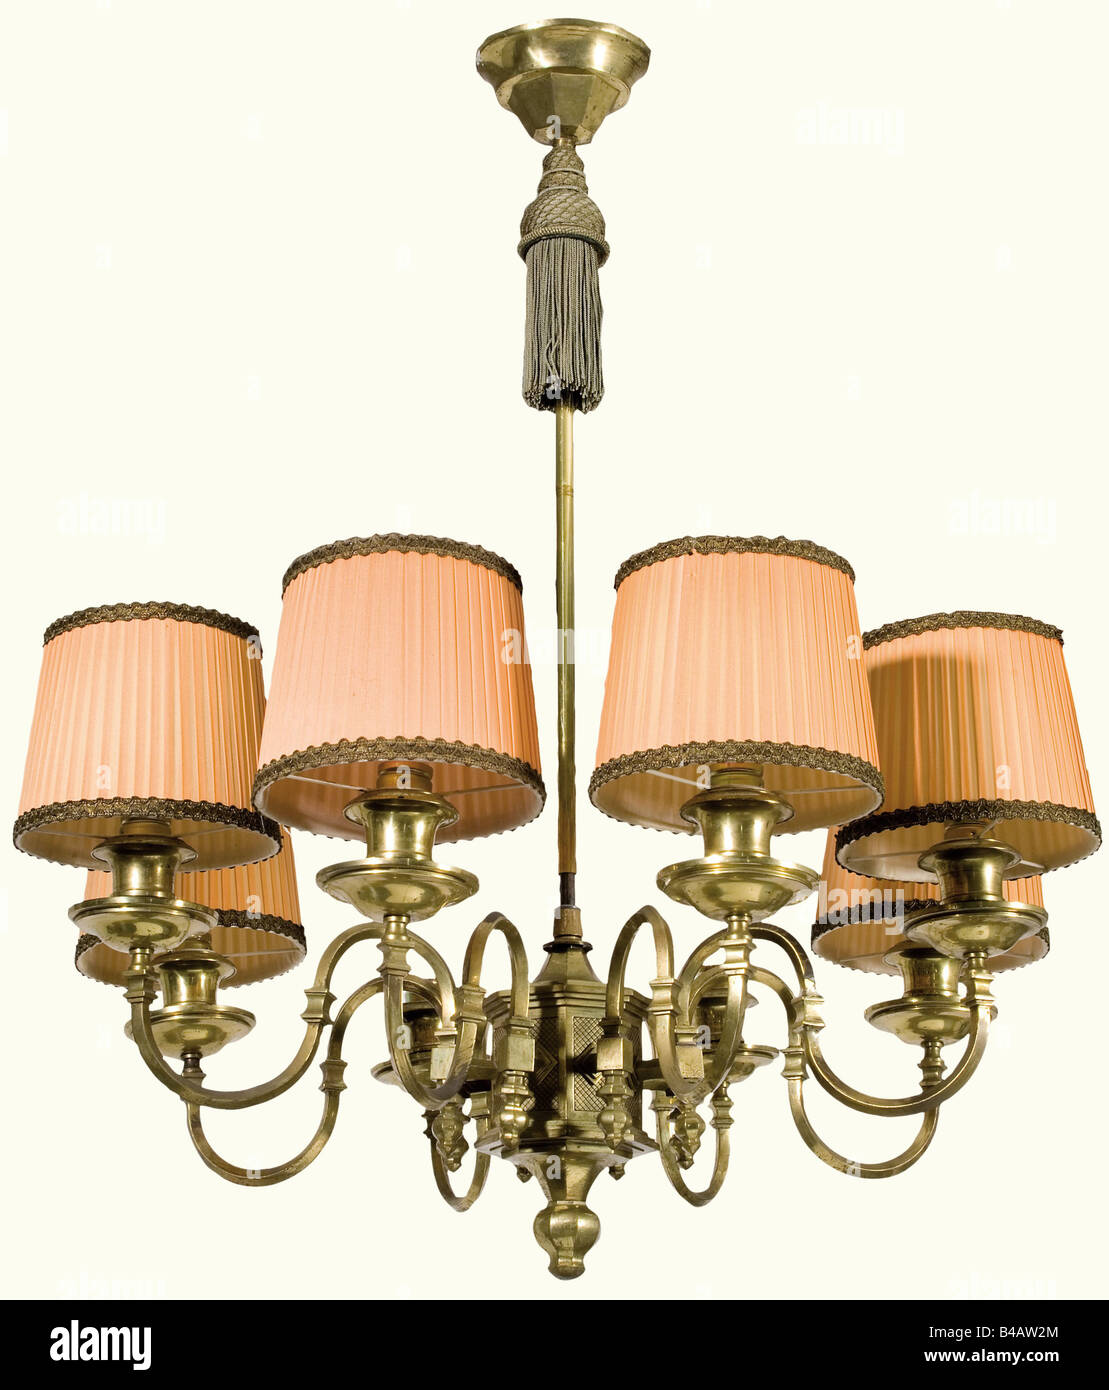 Paul Ludwig Troost und Leonhard Gall - a large ceiling chandelier, from the Führer Building on the Königsplatz in Munich. Brass. The heavy octagonal centrepiece with eight mounted arms with light fixtures and salmon-coloured lampshades (two missing). Complete with ceiling attachment, the cables replaced. Height approx. 100 cm, Diameter 76 cm. The Führer Building and the Administration Building of the NSDAP were built according to the plans of the Munich architect Paul Ludwig Troost (1878 - 1934), who was Hitler's favorite architect before Speer. He did not live, Stock Photo